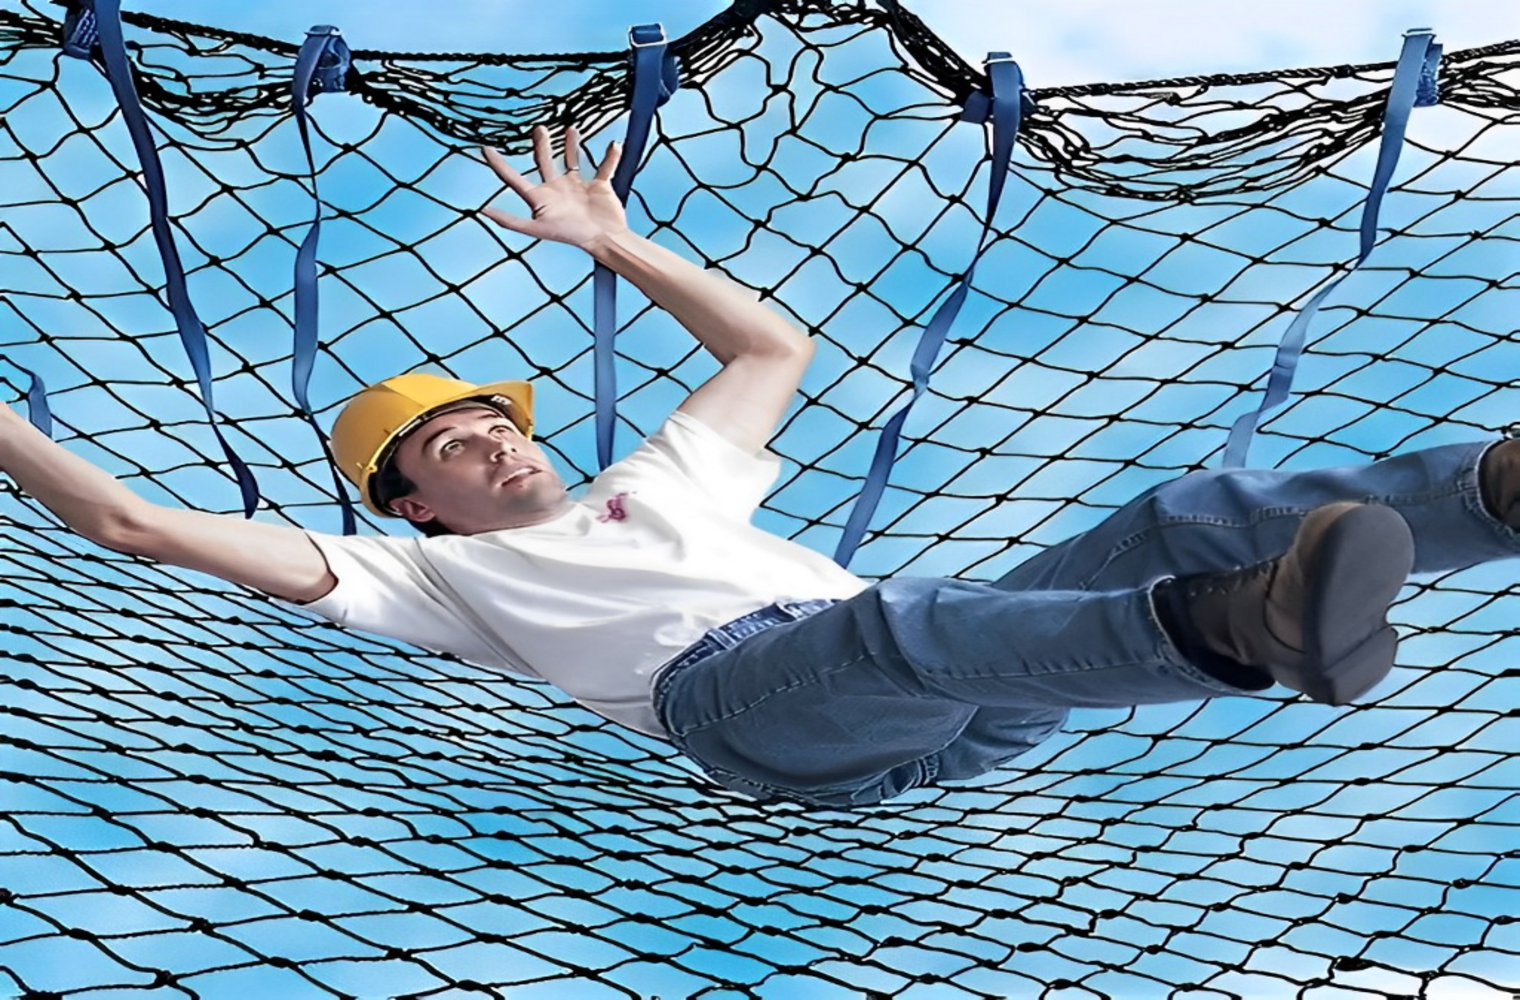 Net for Construction Safety